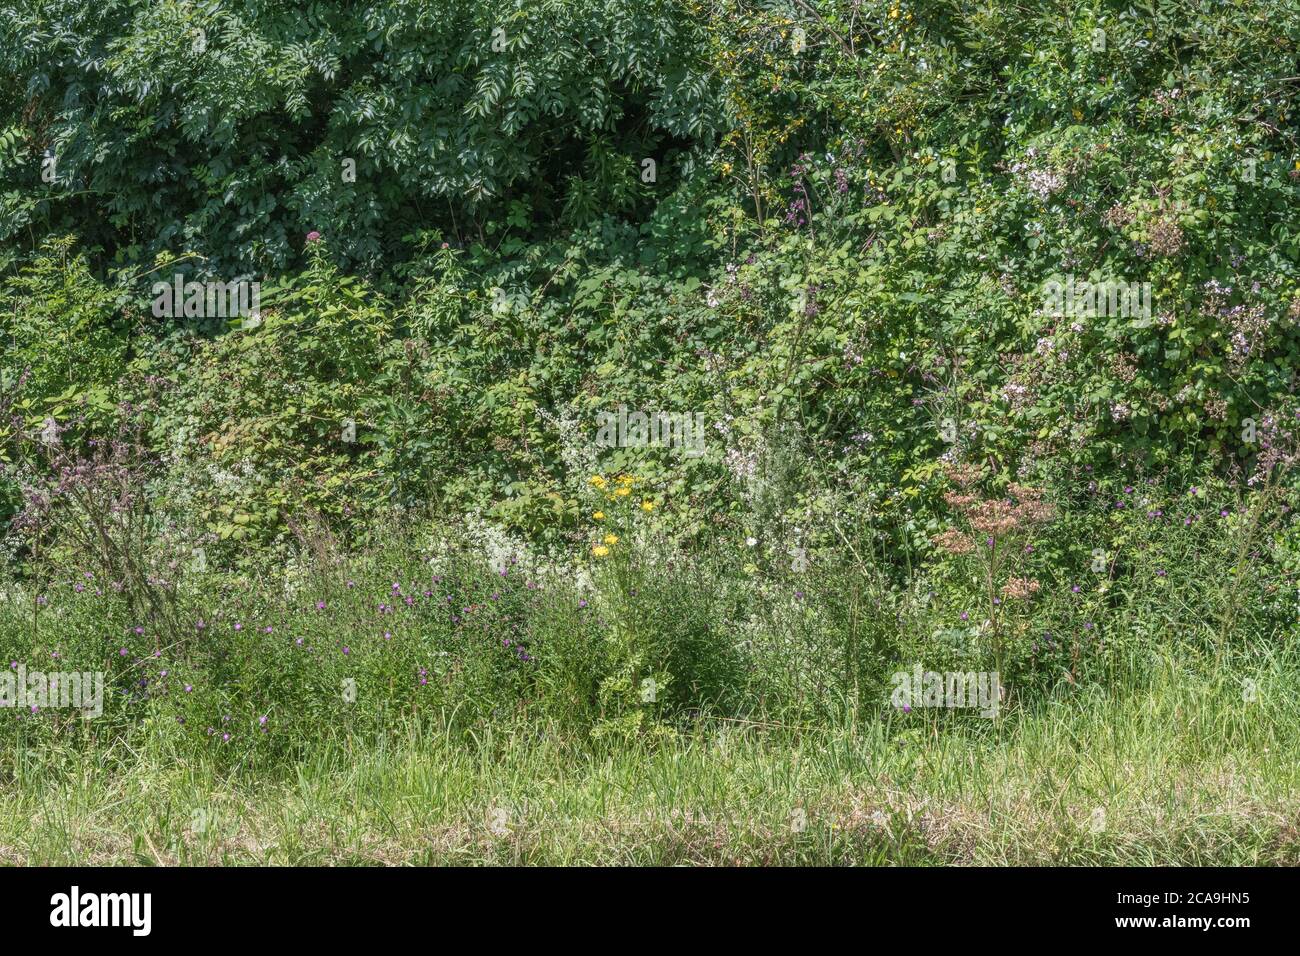 Brambles and a variety of colourful UK roadside weeds in summer sunshine. Stock Photo